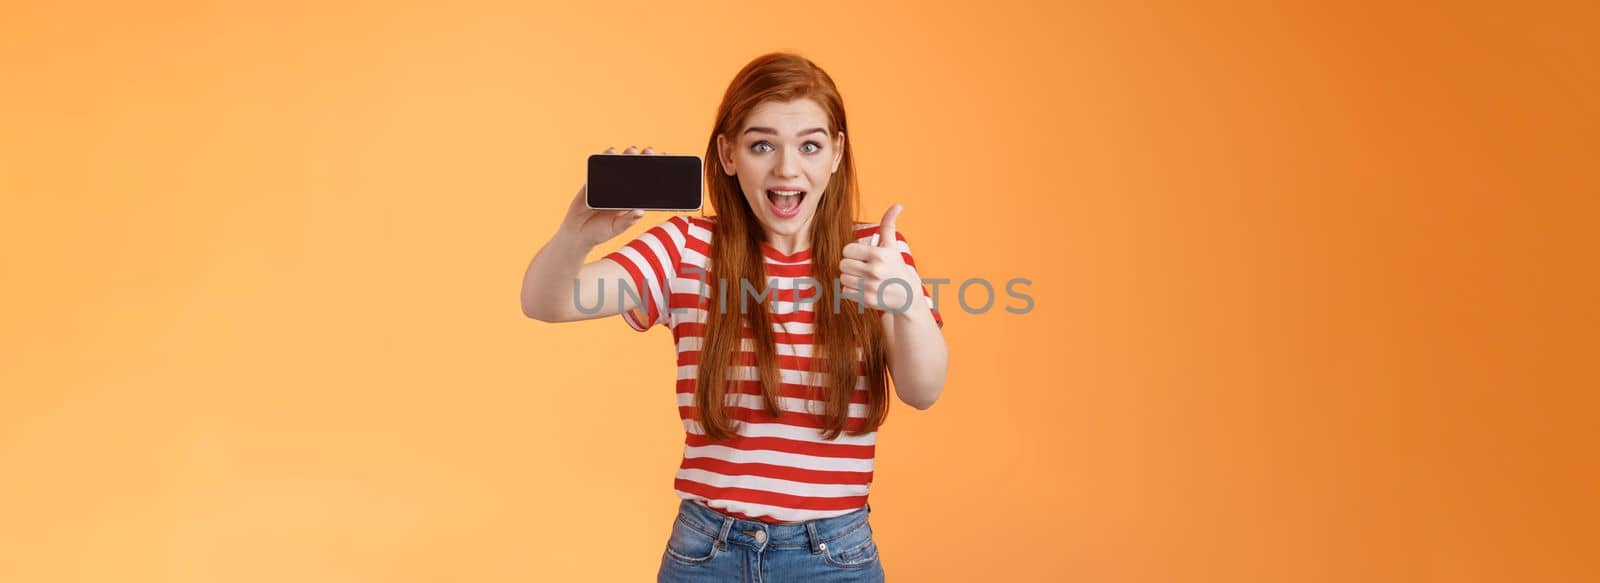 Excited cheerful 20s caucasian ginger girl, satisfied awesome game, beat friend score arcade, show thumb-up, smiling thrilled, enthusiastic introduce cellphone app, hold device horizontal.